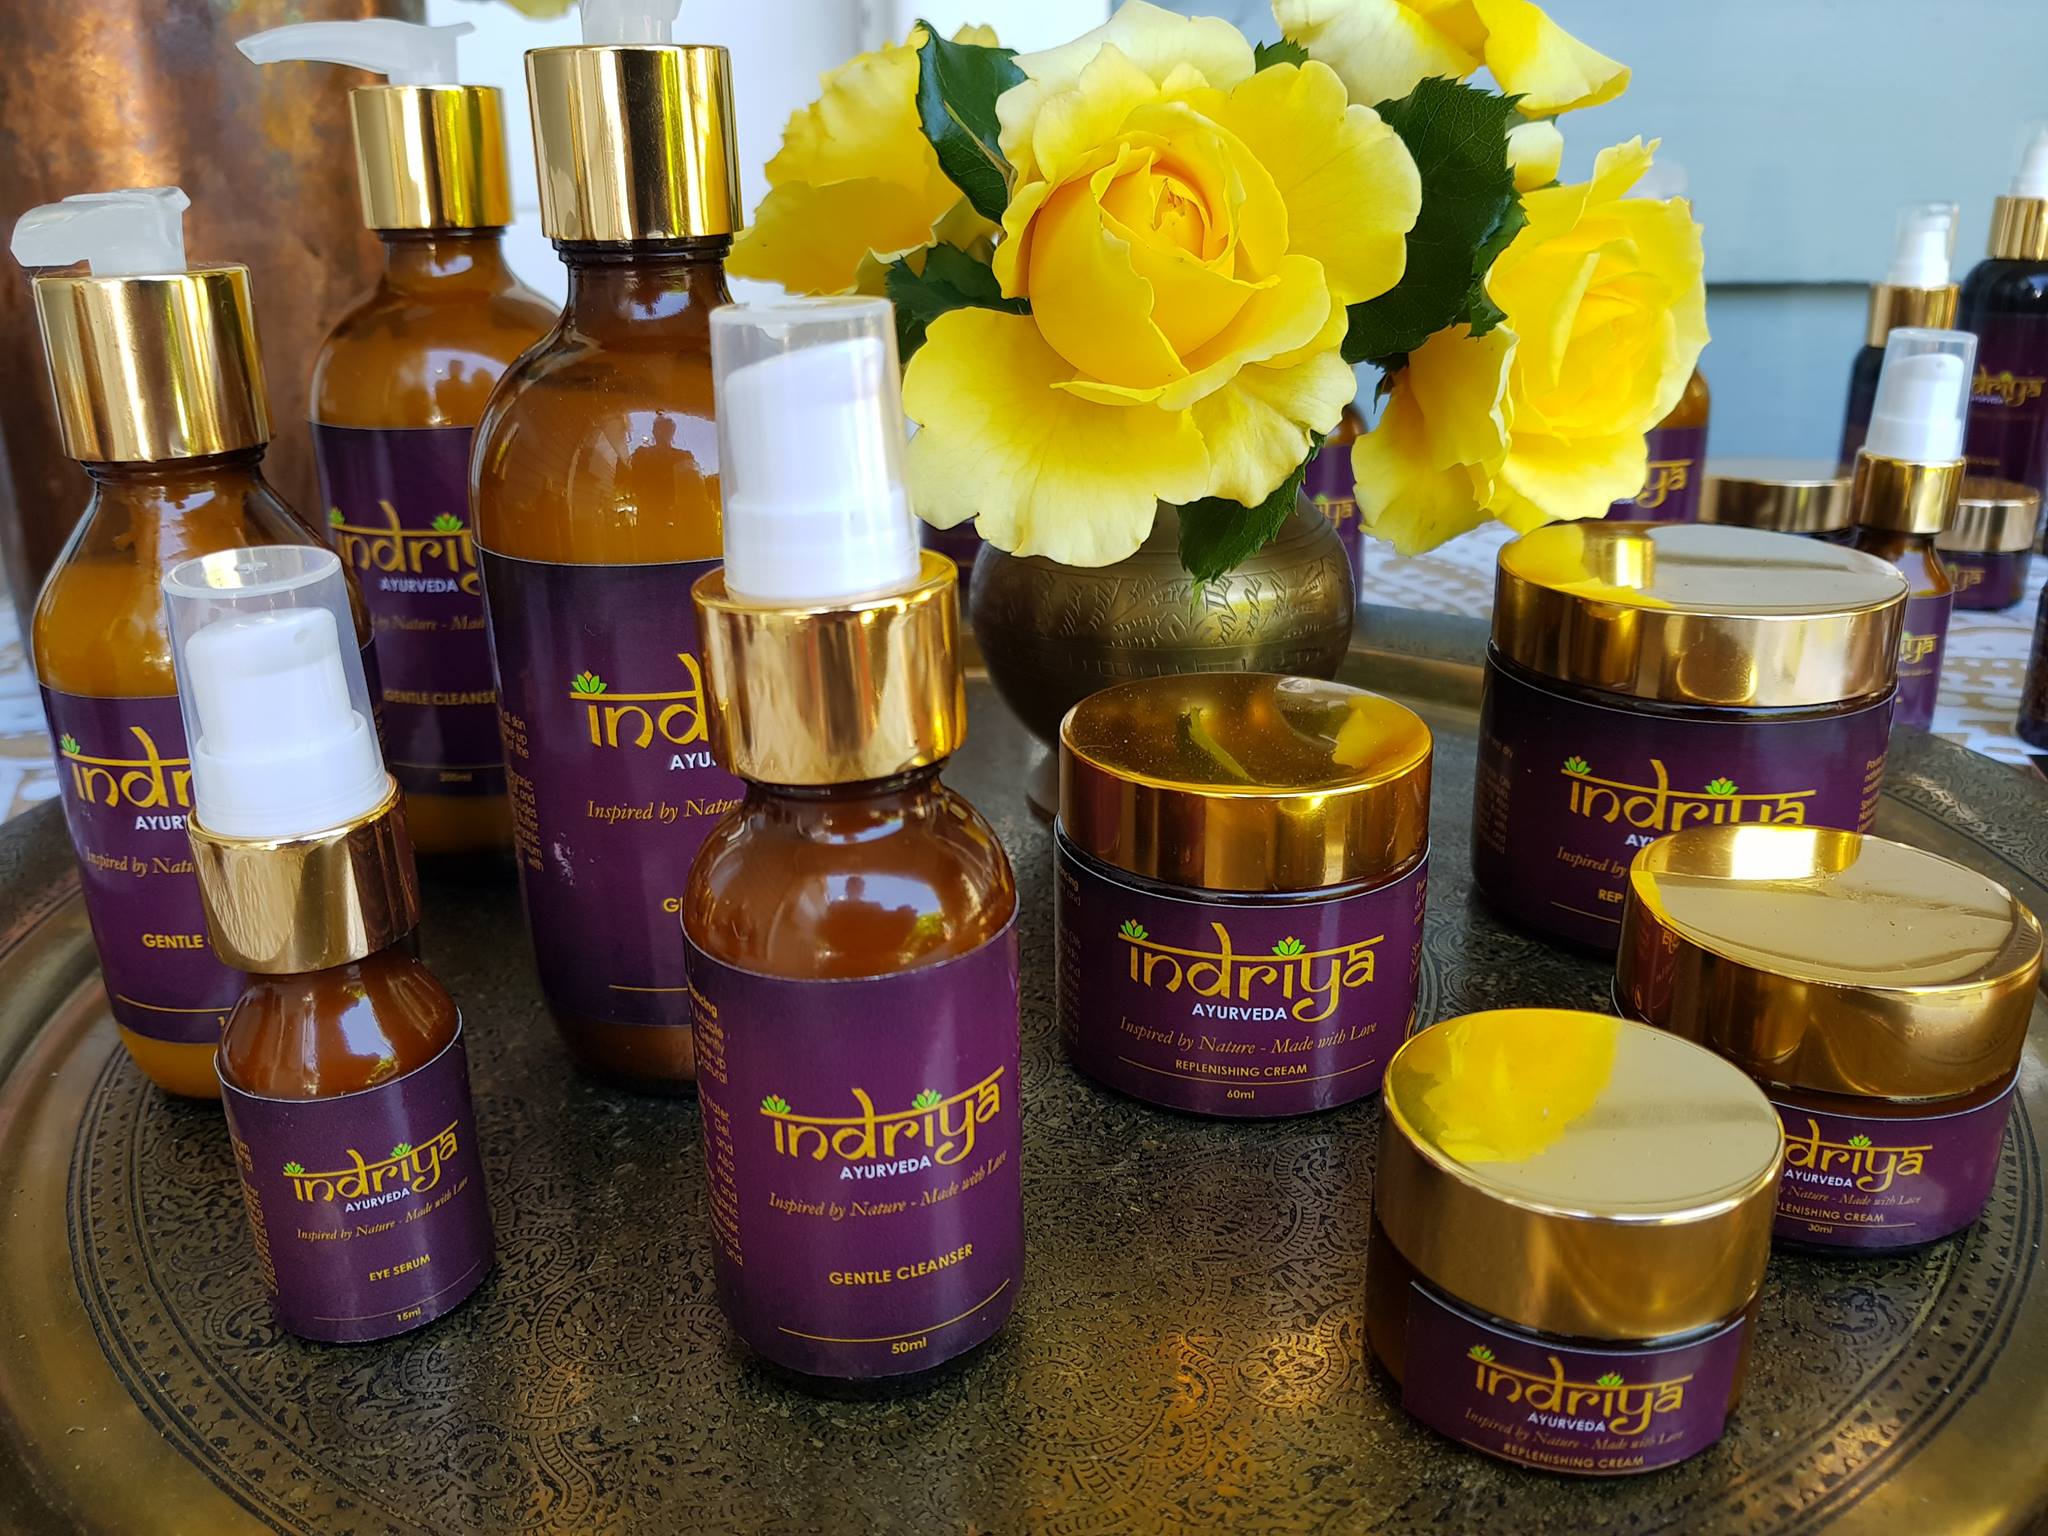 Hand-crafted skincare